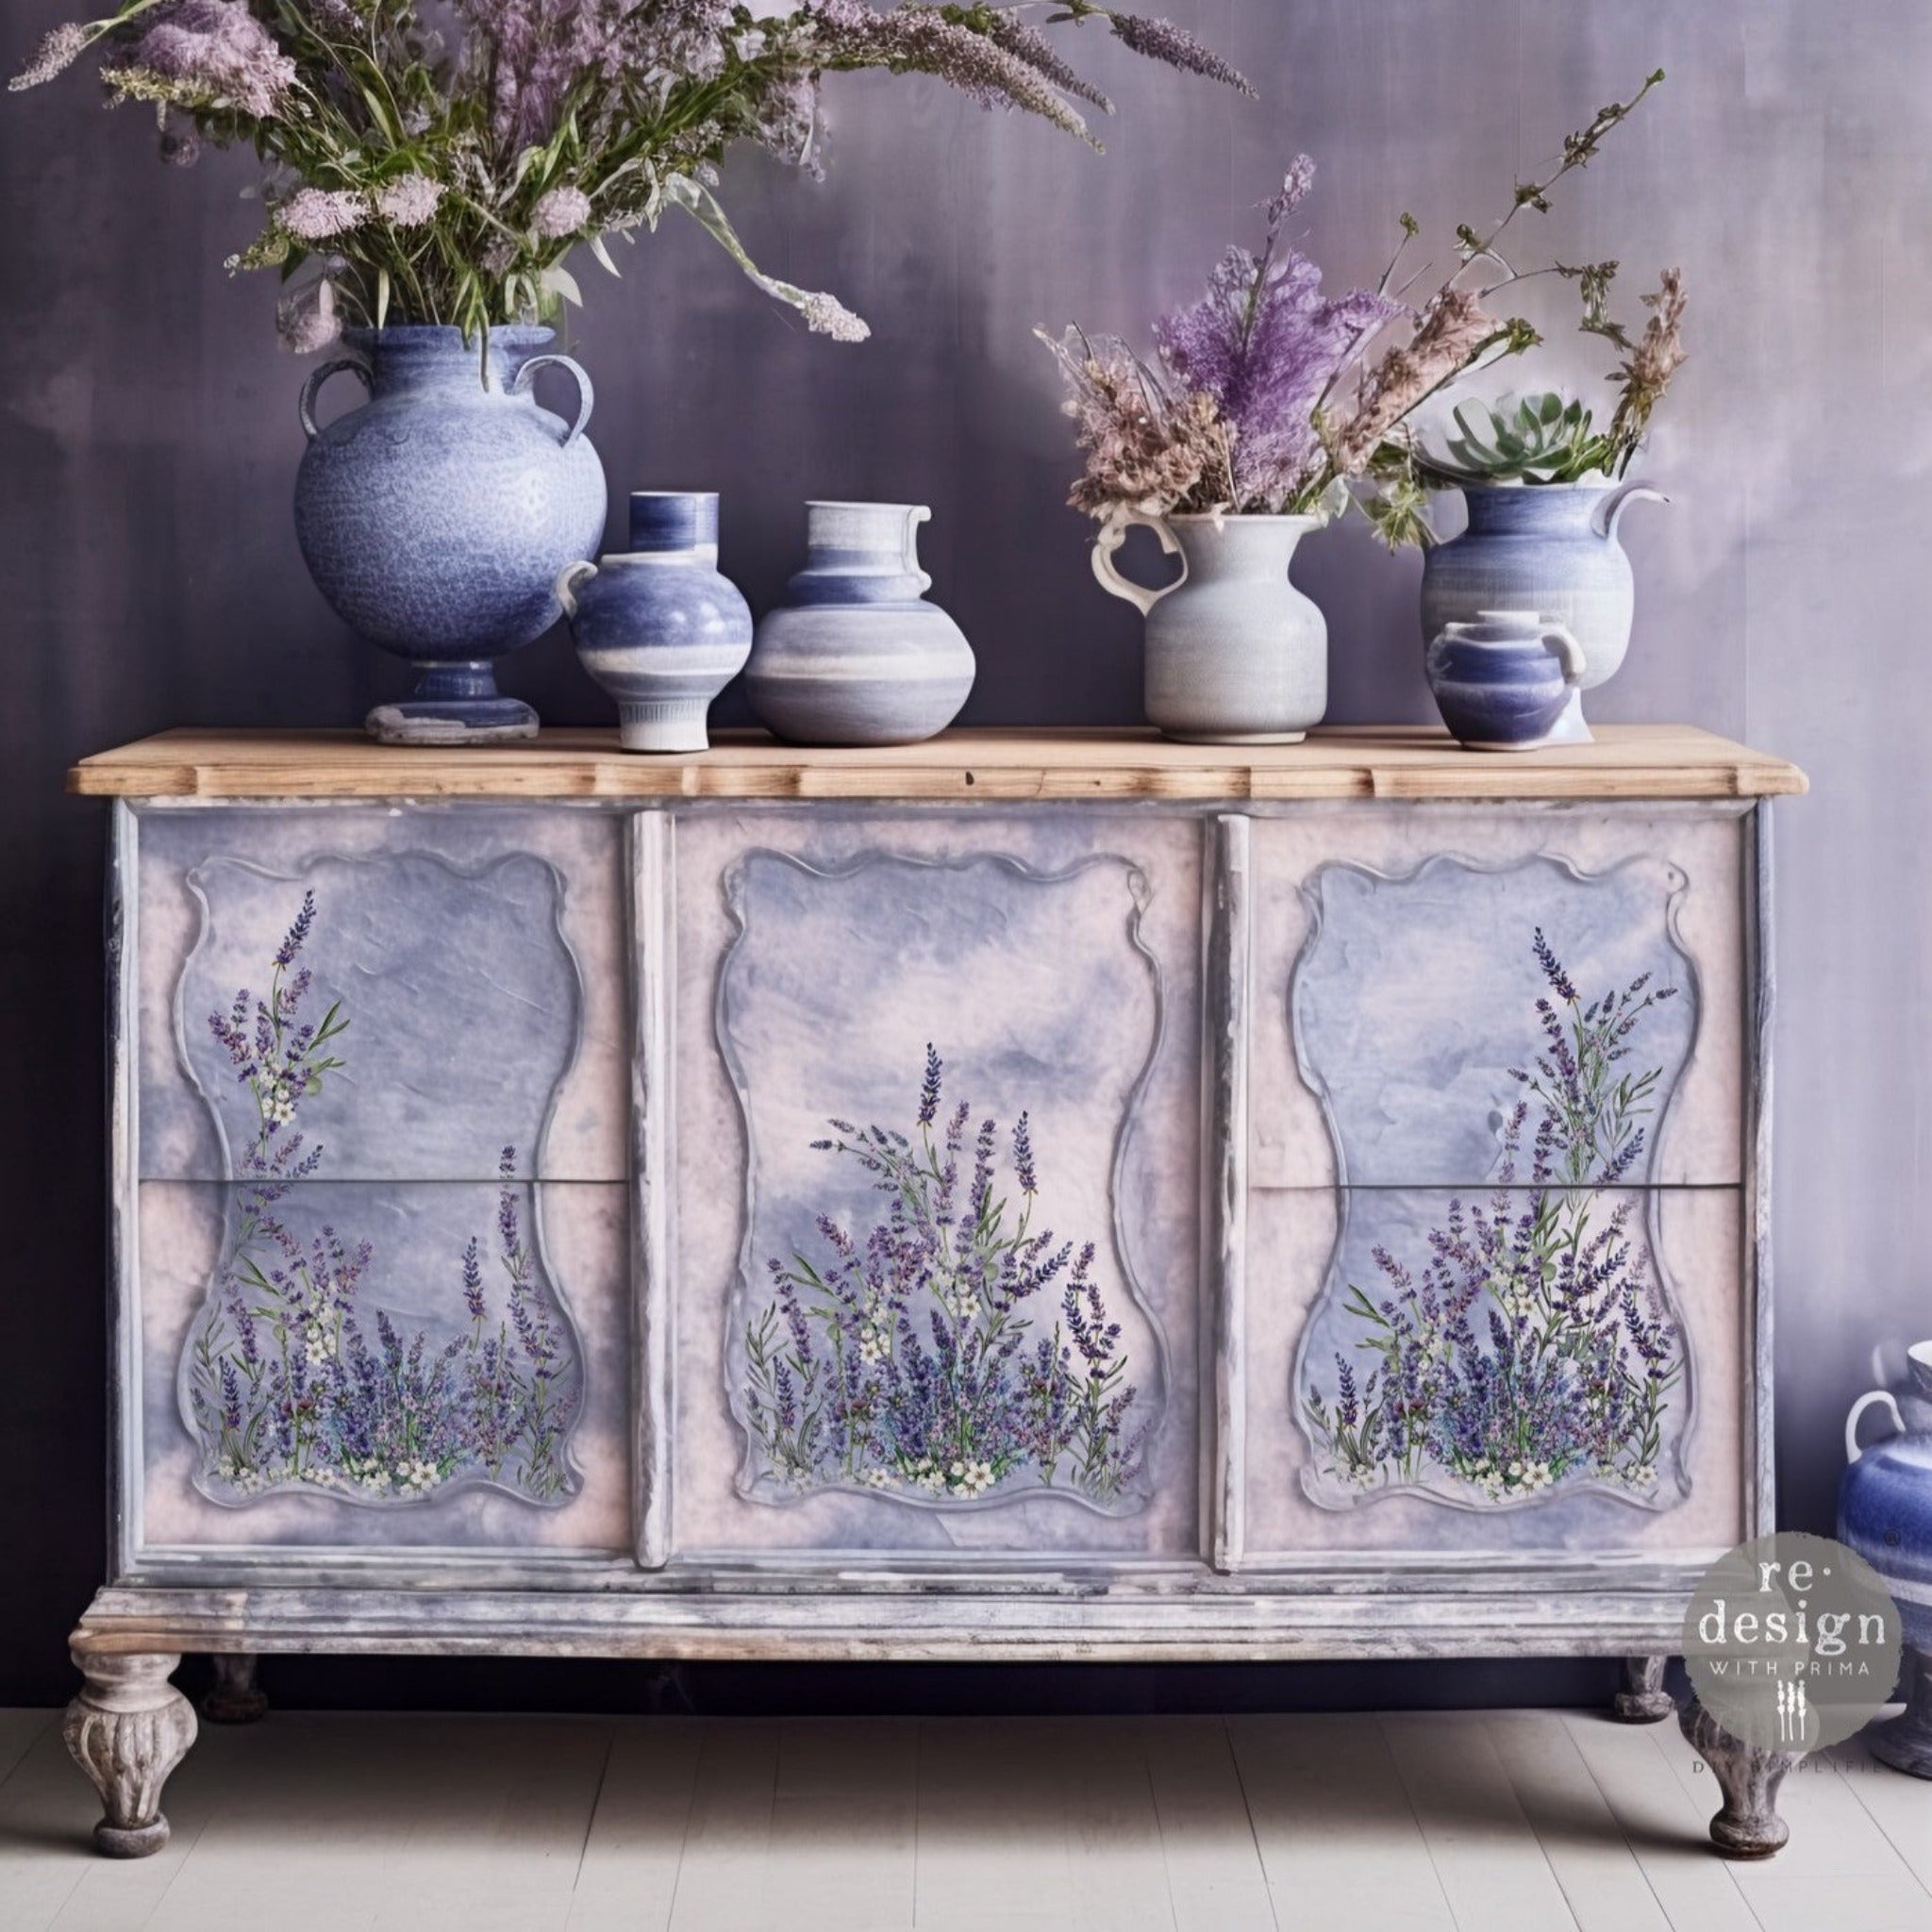 A buffet table a blend of white and light blue and features ReDesign with Prima's Lavender Bunch small transfer on the front panel inlays.